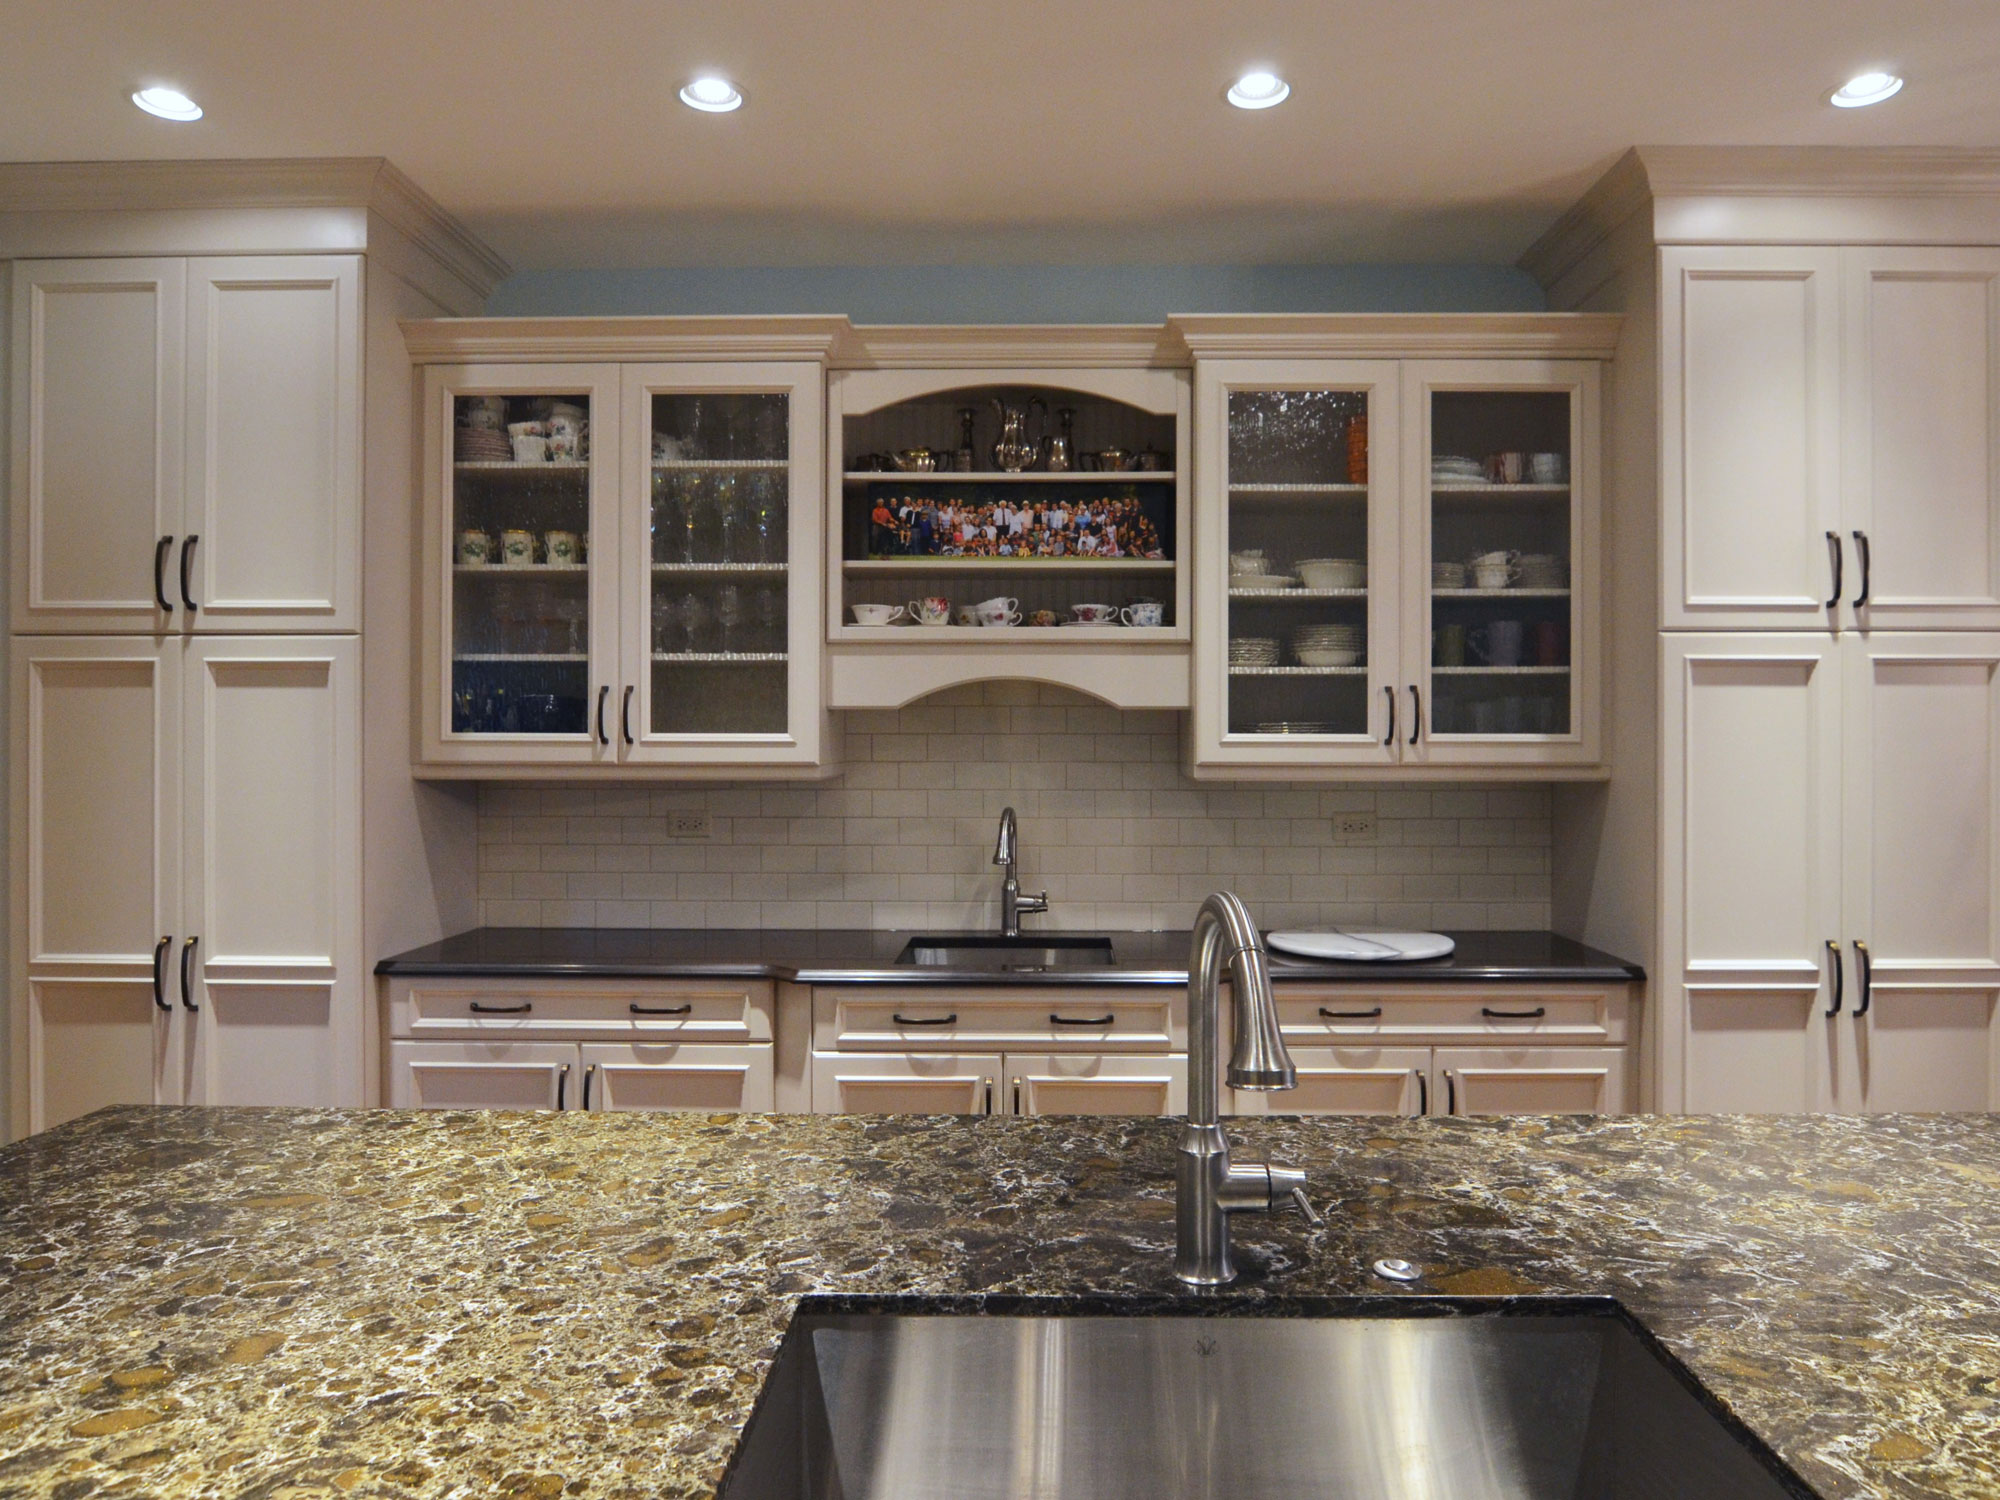 Kitchen remodeling in Naperville, IL. Oversized island in home kitchen area.